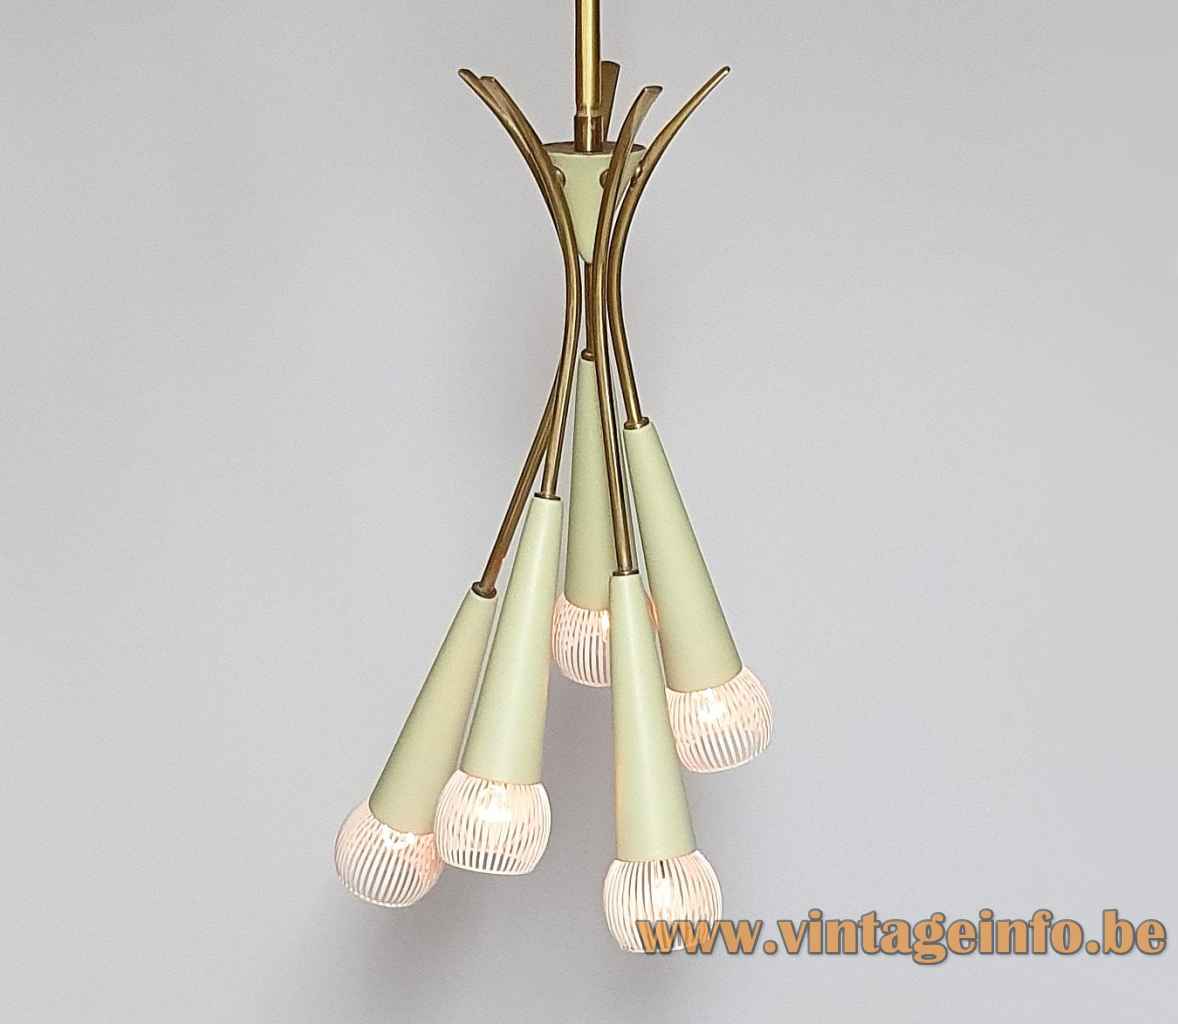 1950s Sputnik cluster chandelier conical tubes brass rods round ribbed lampshades 1960s Germany E14 sockets